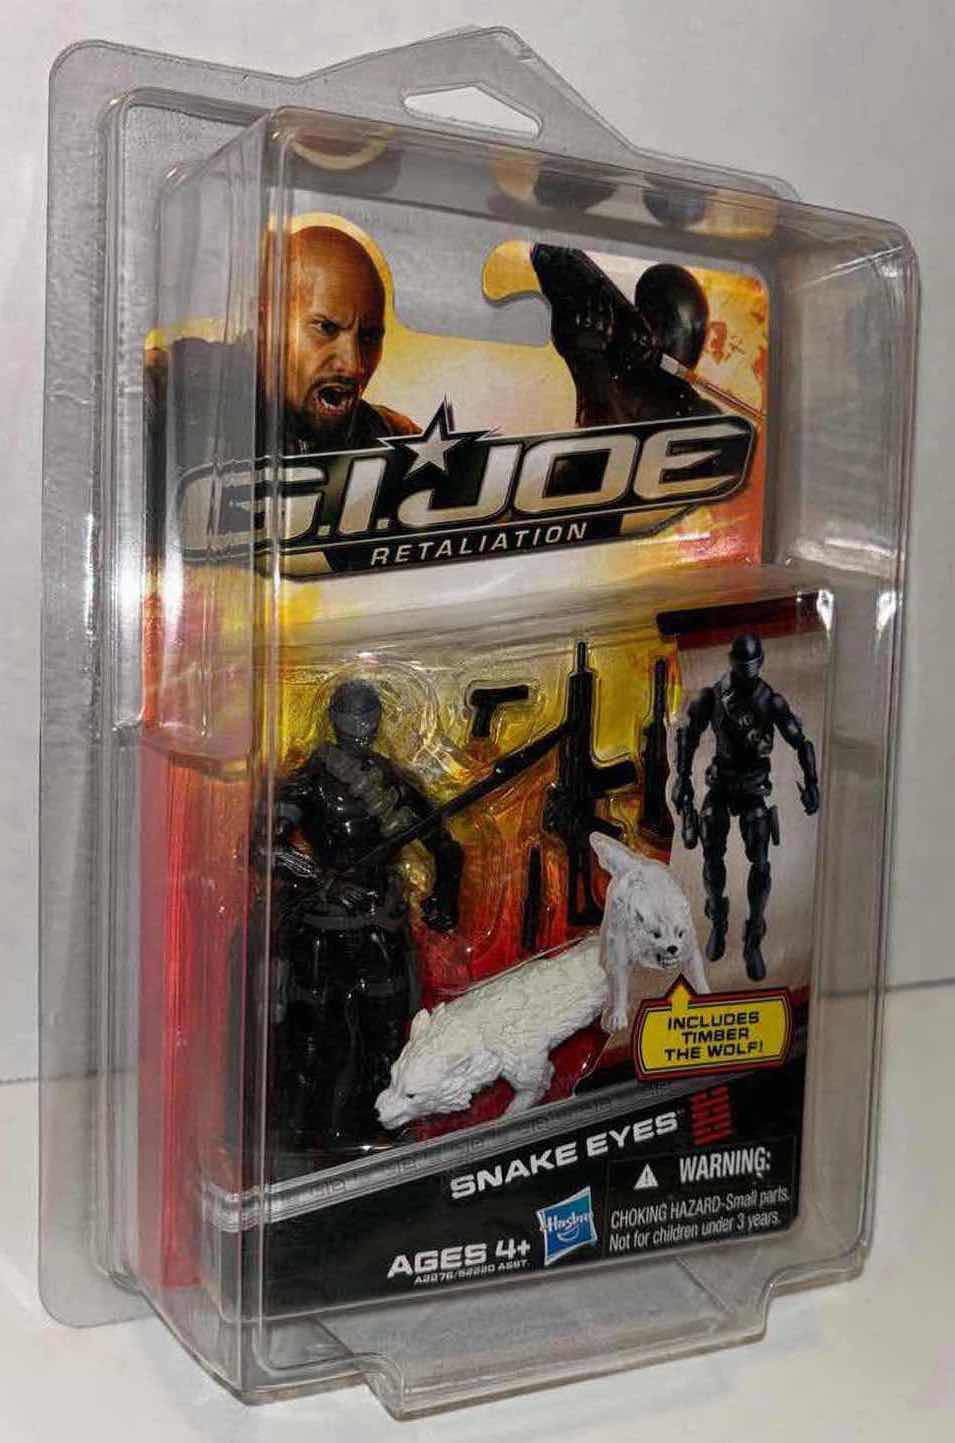 Photo 1 of NEW 2012 HASBRO G.I. JOE RETALIATION ACTION FIGURE & ACCESSORIES “SNAKE EYES” IN PROTECTIVE CLEAR CLAMSHELL CASE